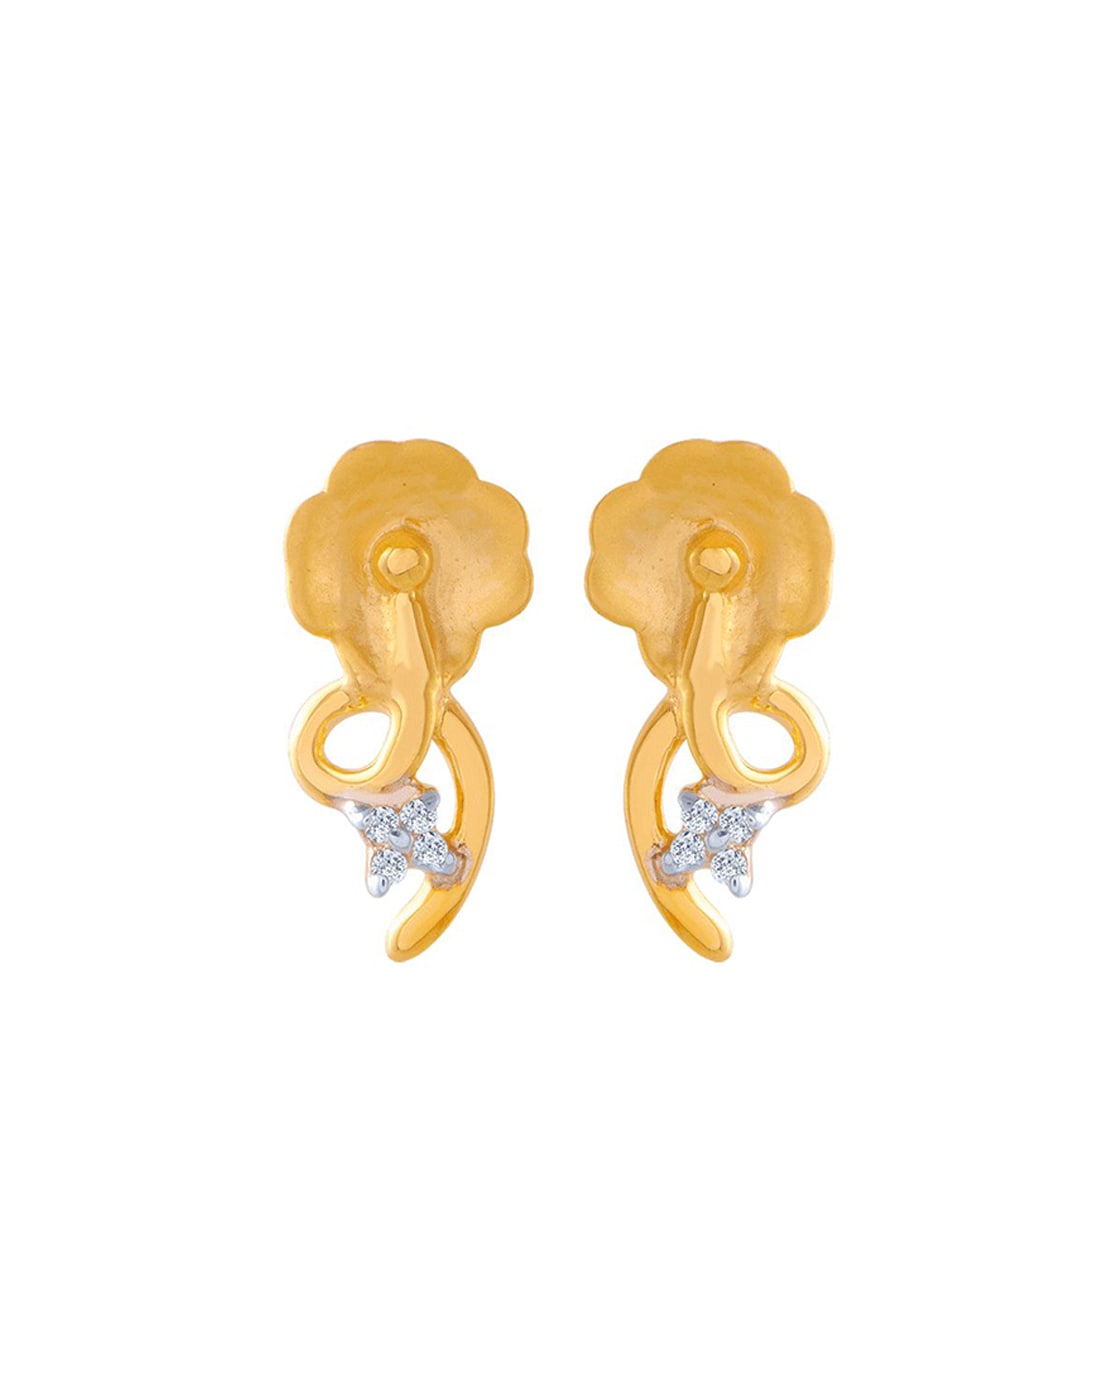 Buy P.C. Chandra Jewellers 14 kt Gold Earrings Online At Best Price @ Tata  CLiQ